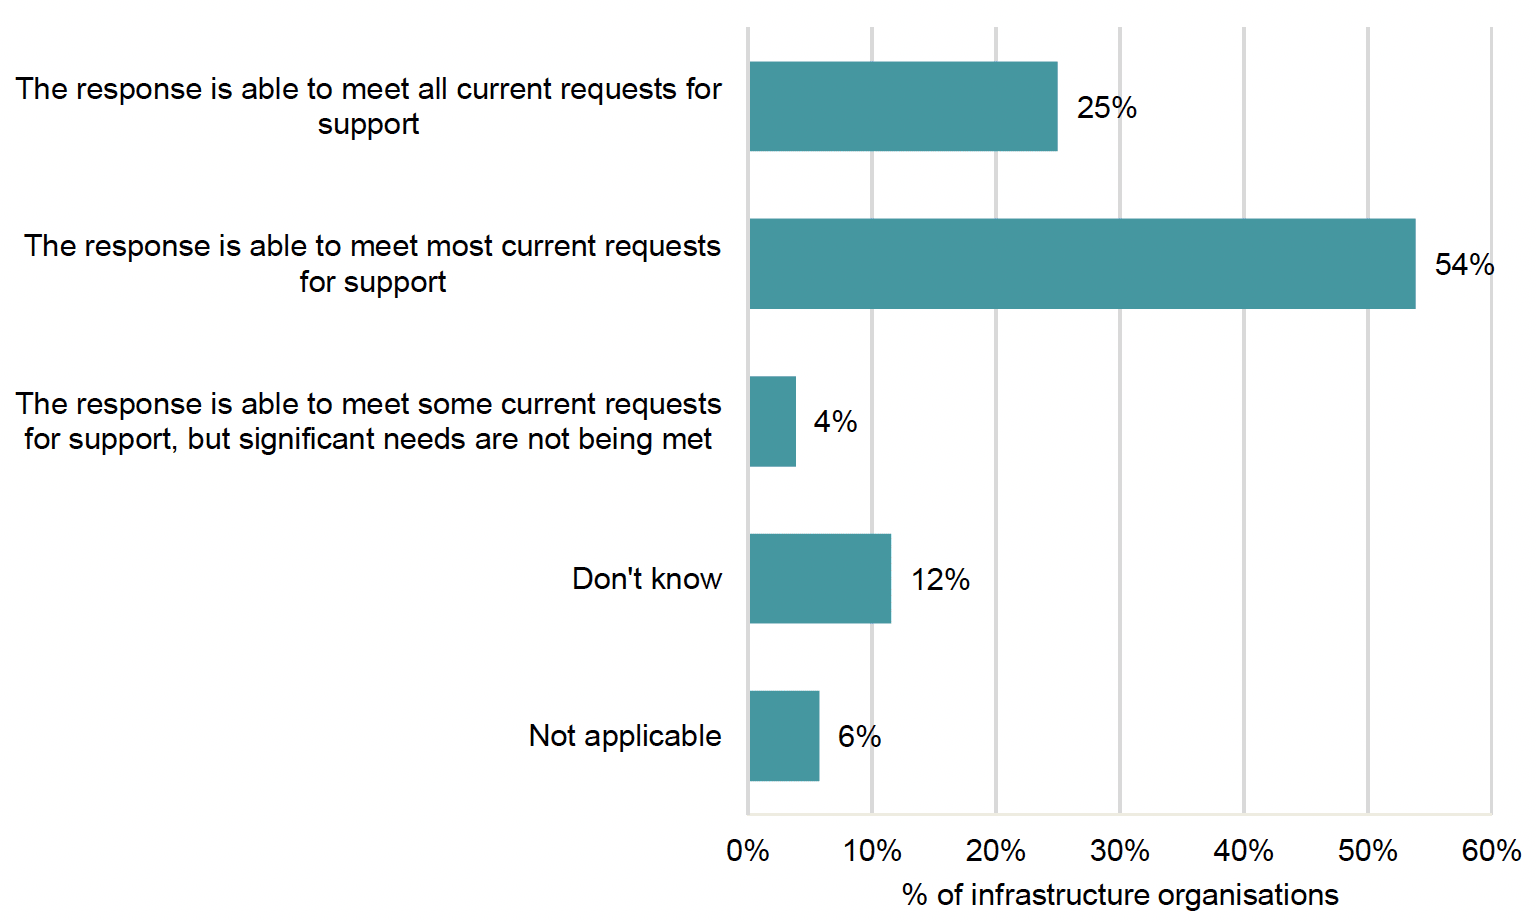 Chart showing infrastructure organisation views on the extent to which the response by all organisations/actors is meeting current needs within their area/community